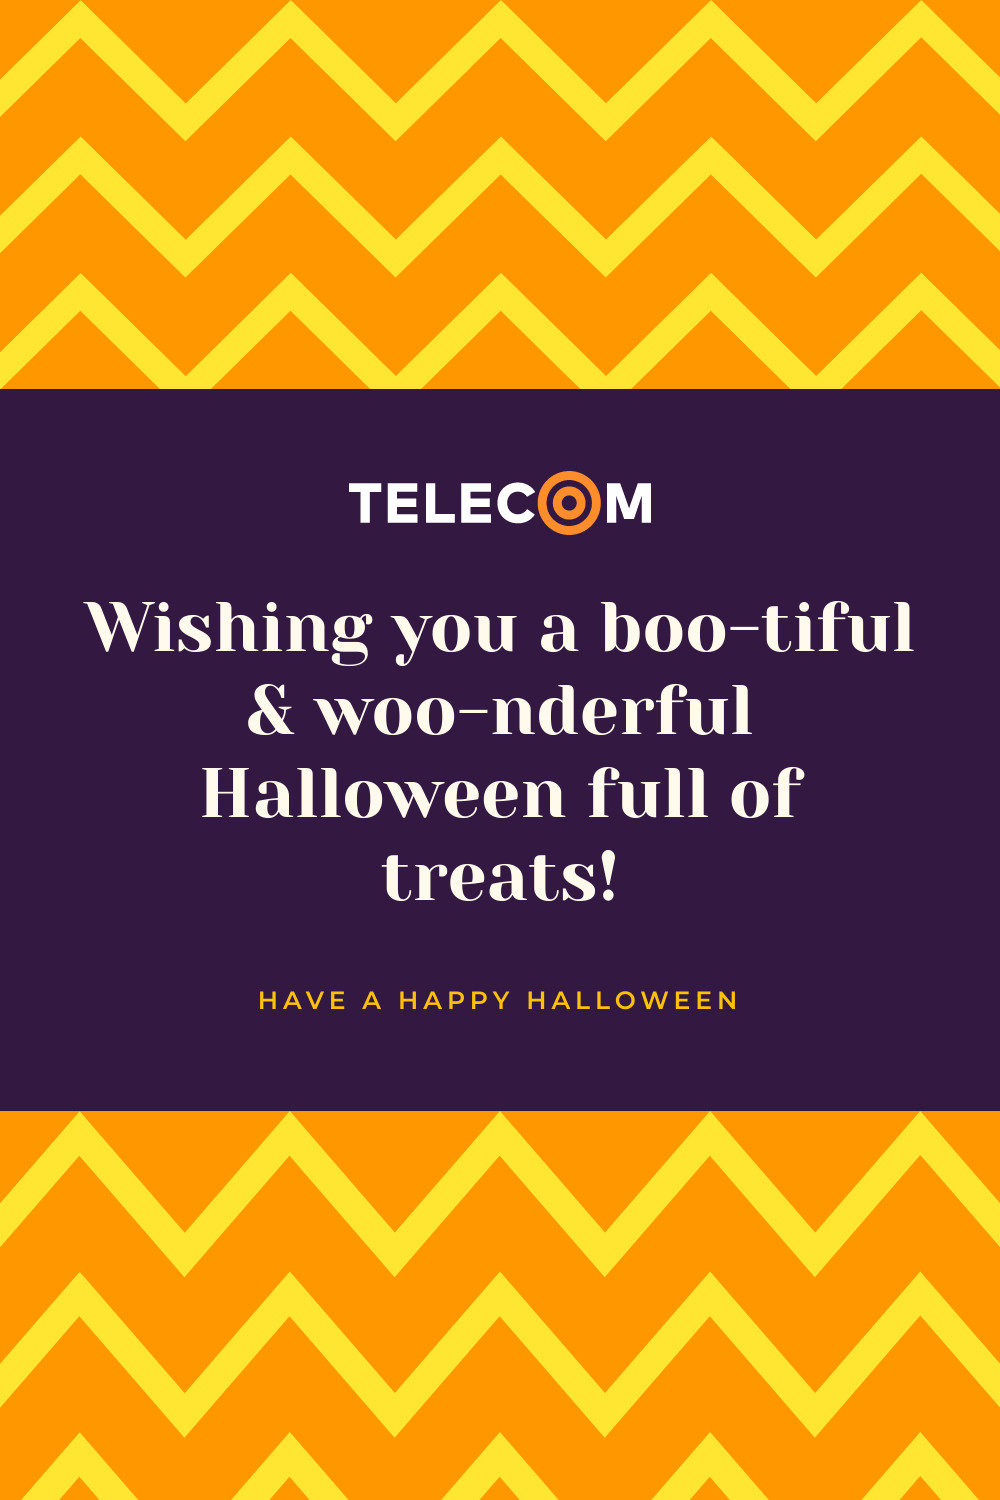 Telecom Bootiful and Woonderful Halloween Facebook Cover 820x360